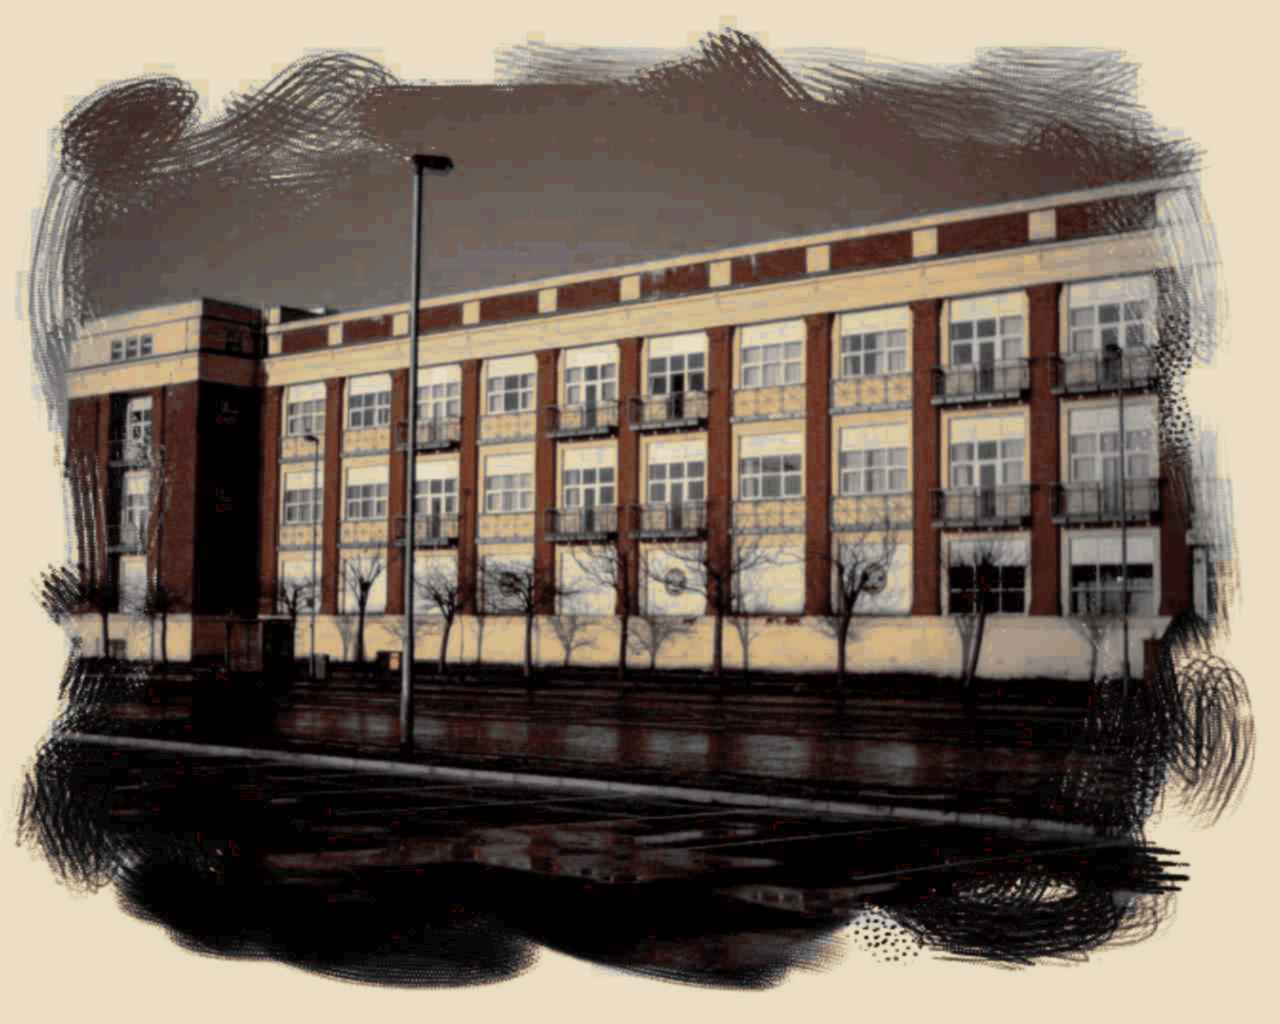 This is a picture of the old Wilkinsons factory on the Strand Road.